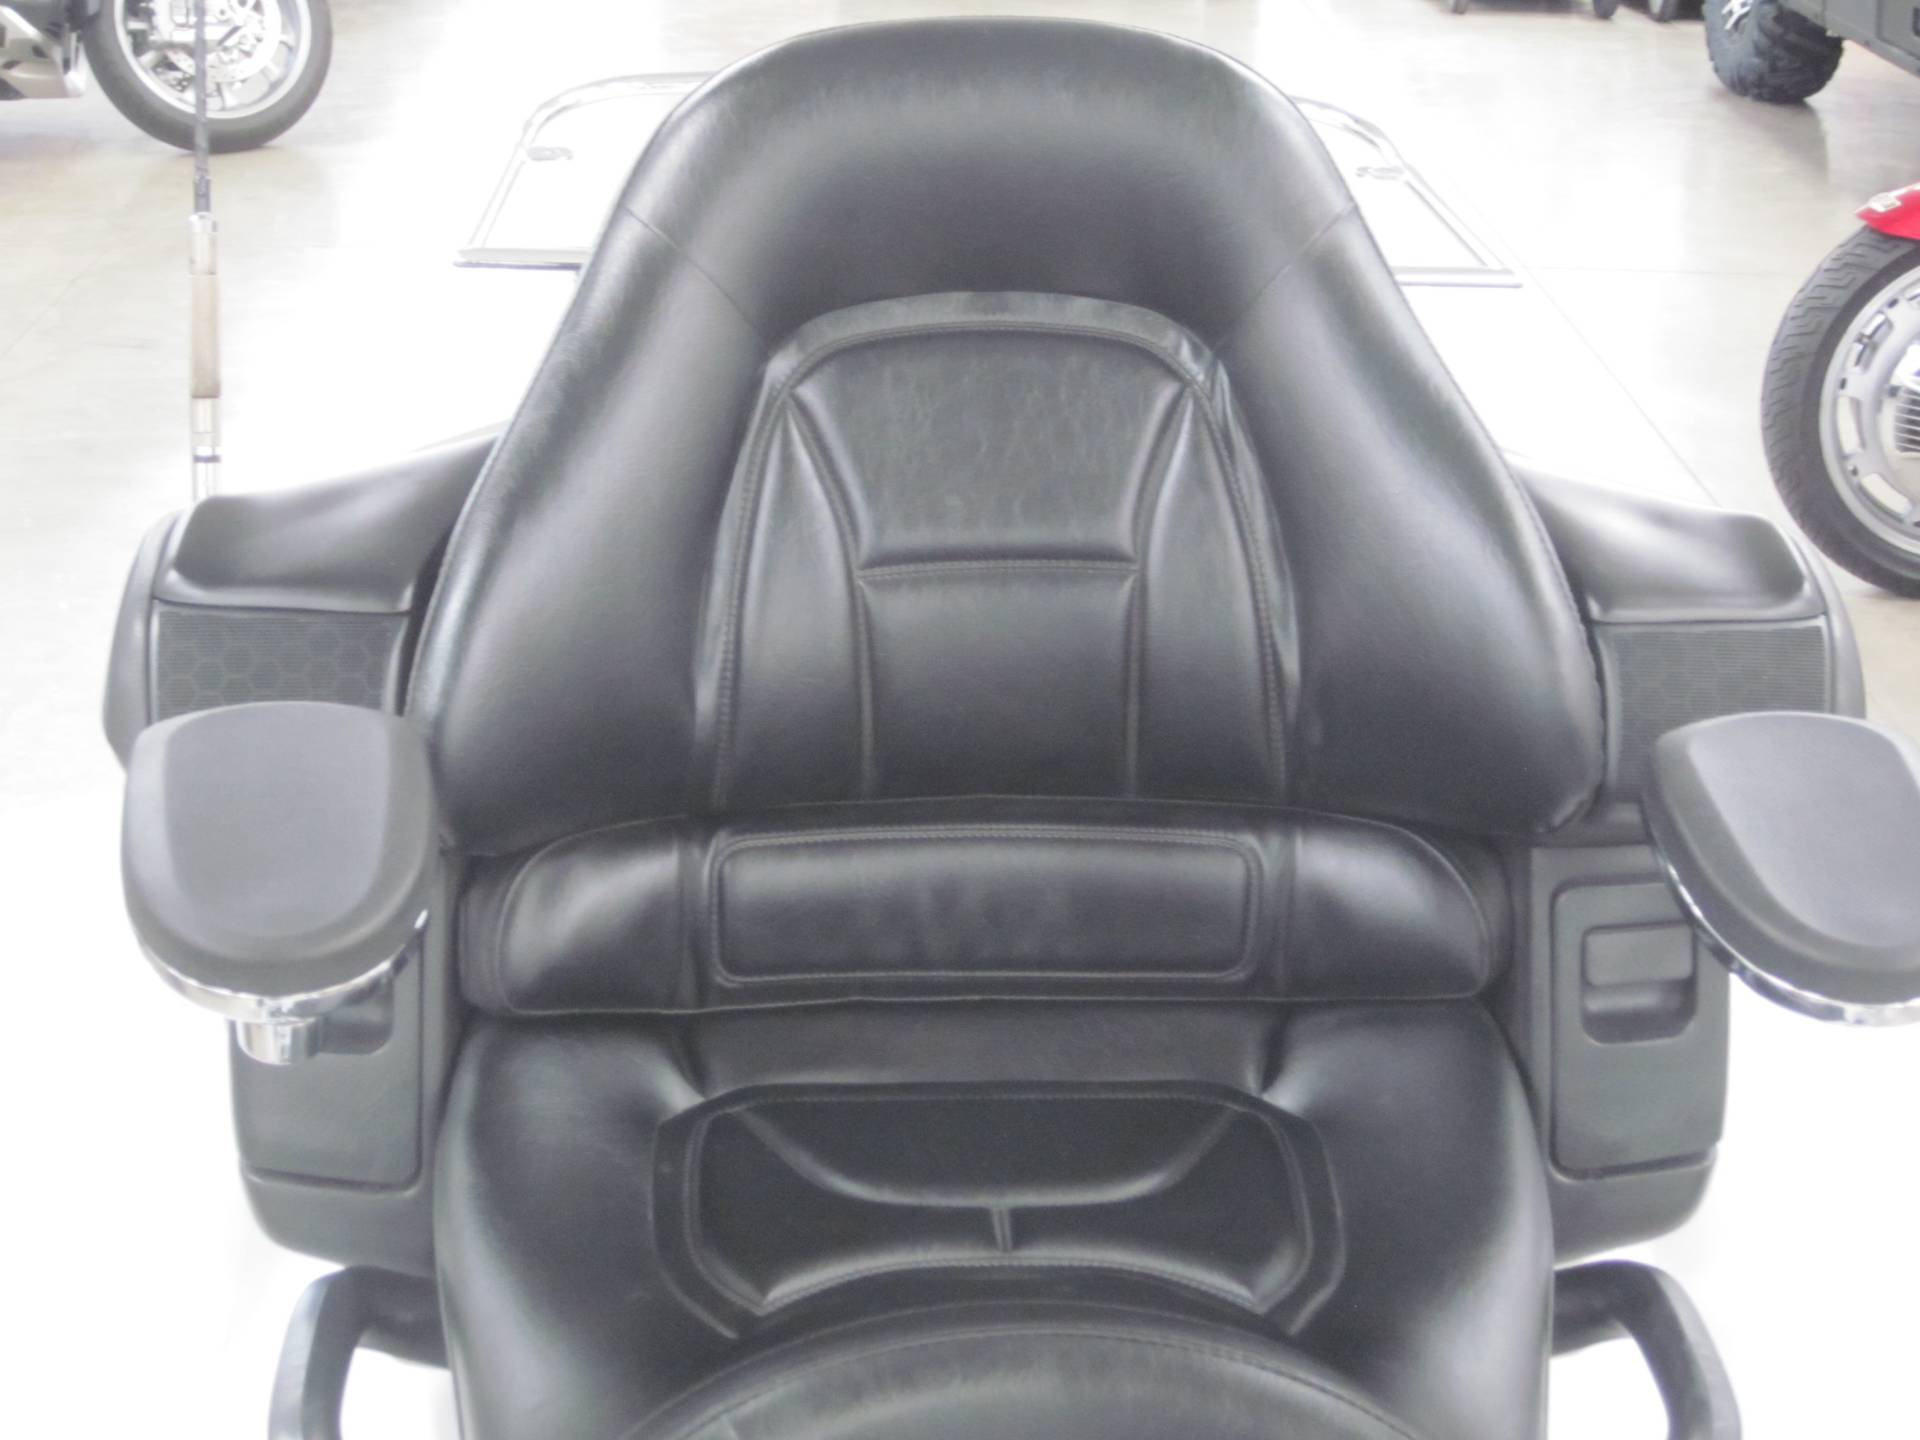 Used 2005 Csc Gold Wing Trikes In Lima Oh Stock Number 401137